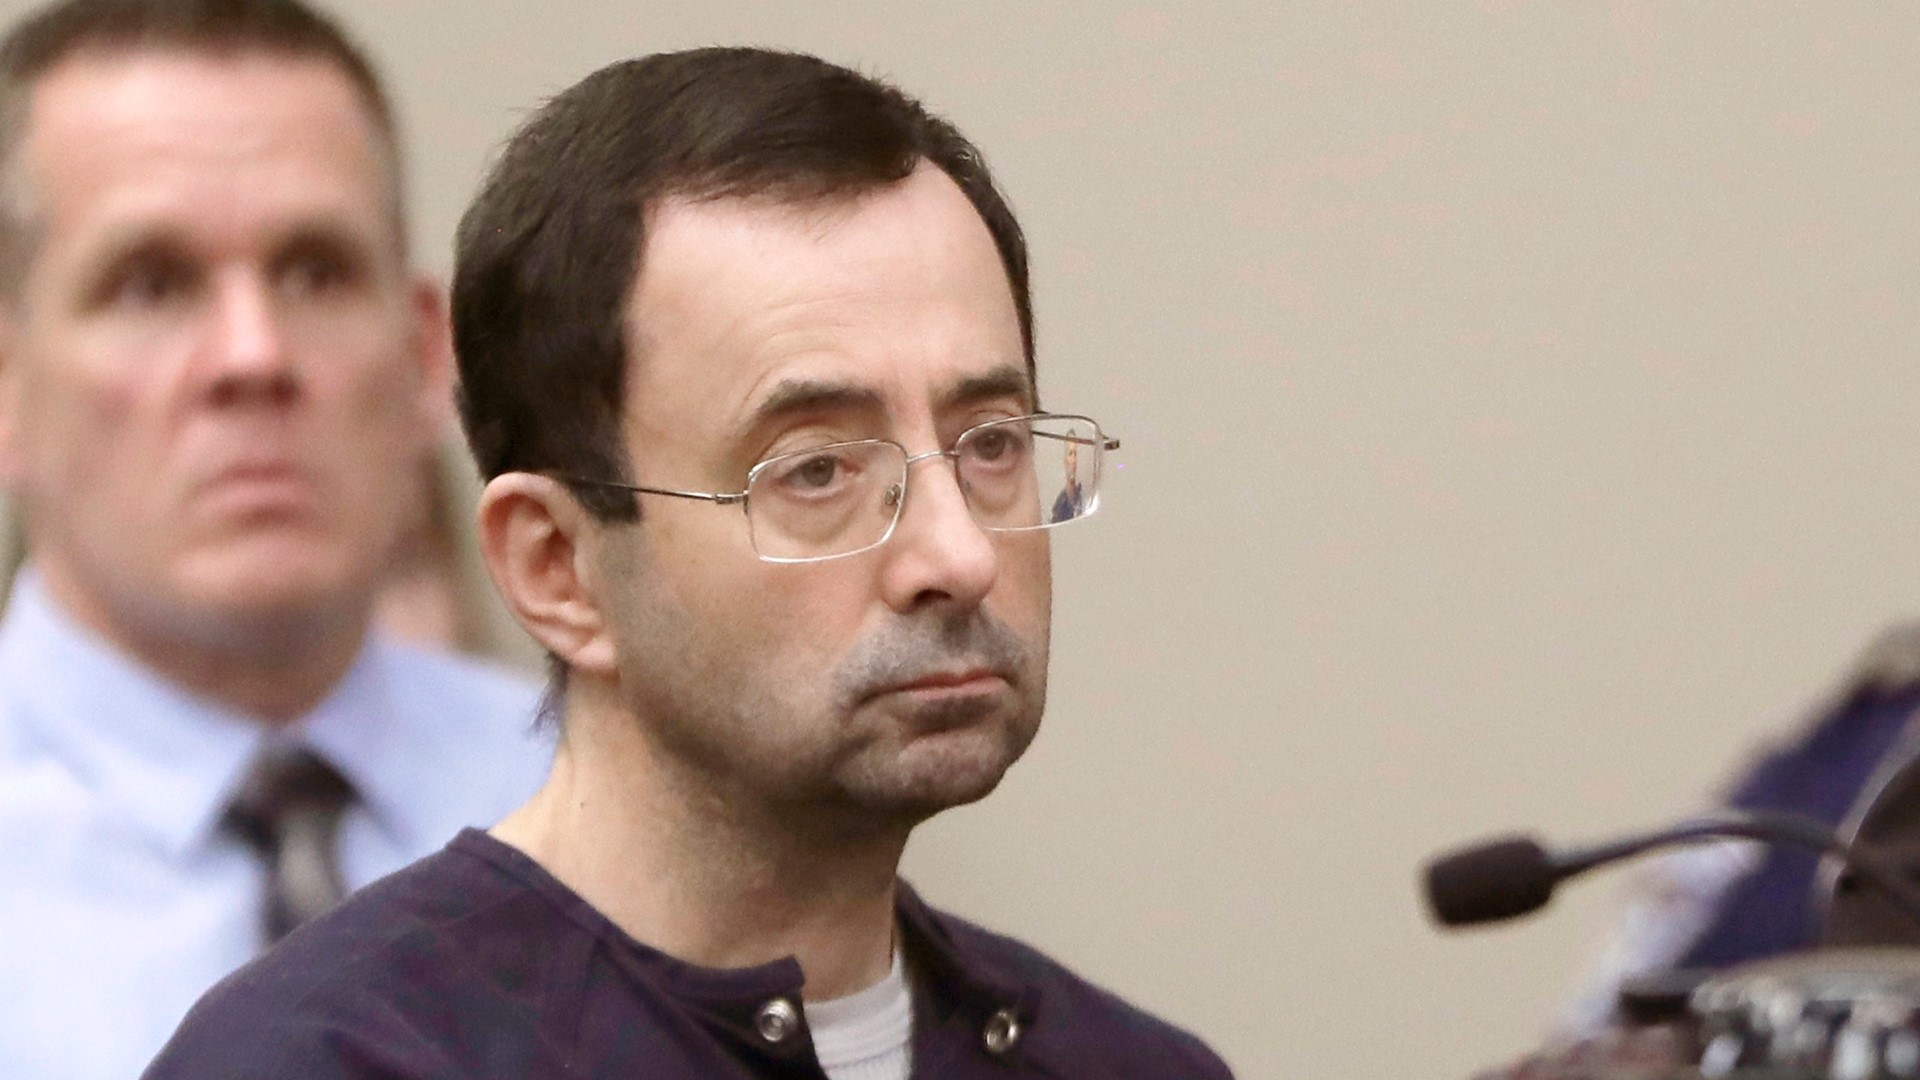 USA Gymnastics is offering sexual abuse survivors $215 million to settle their claims against the organization in the wake of the Larry Nassar scandal.